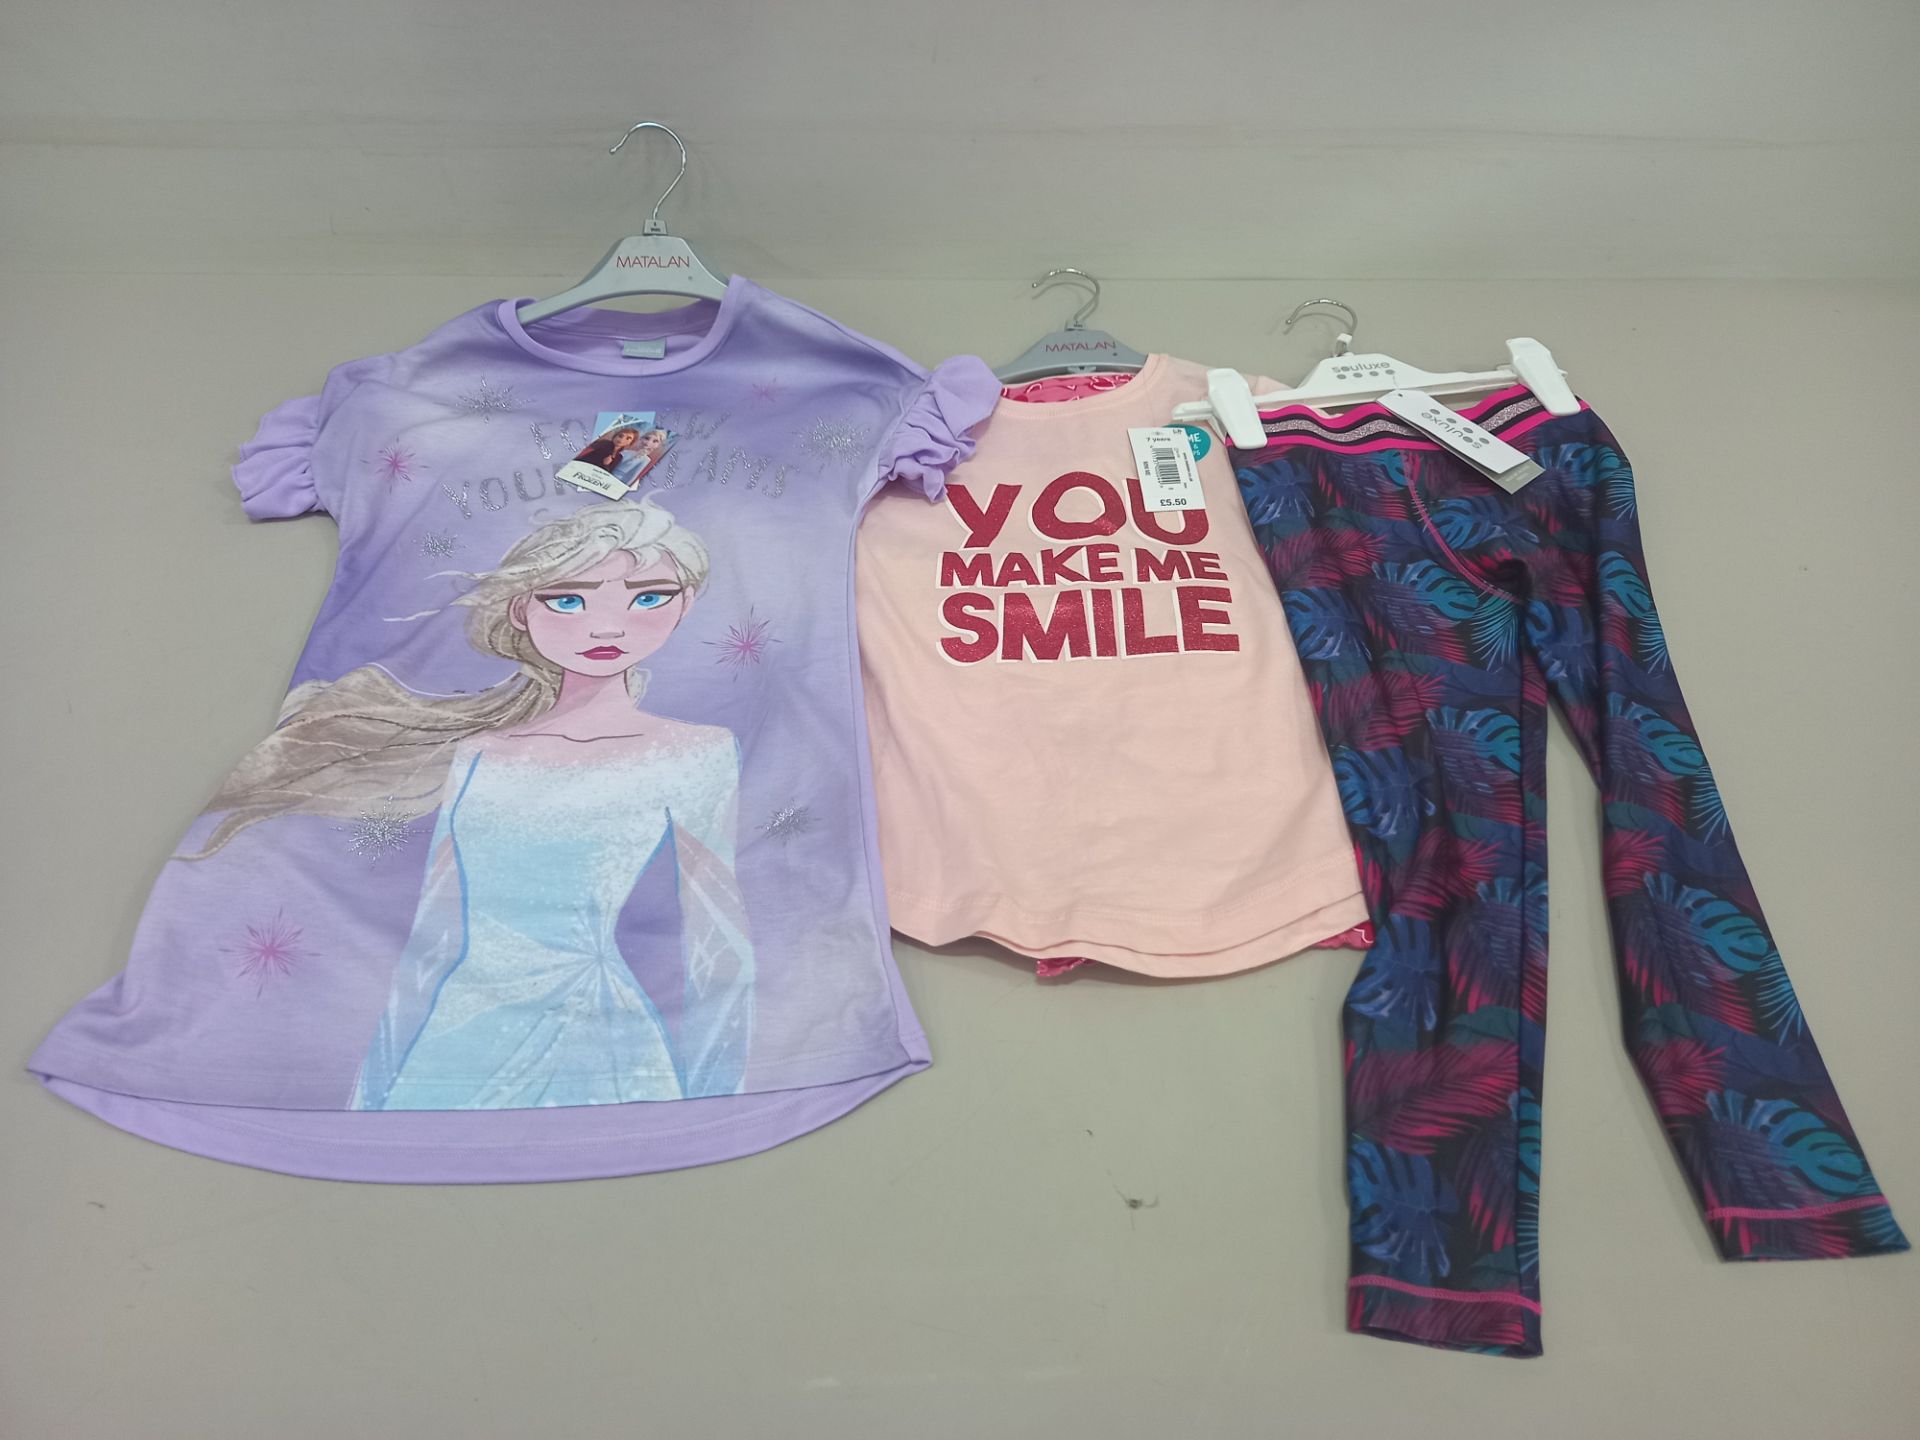 30 PIECE MIXED CLOTHING LOT CONTAINING YOU MAKE ME SMILE TOP AND SHORTS SET, SOULUX GM LEGGINGS